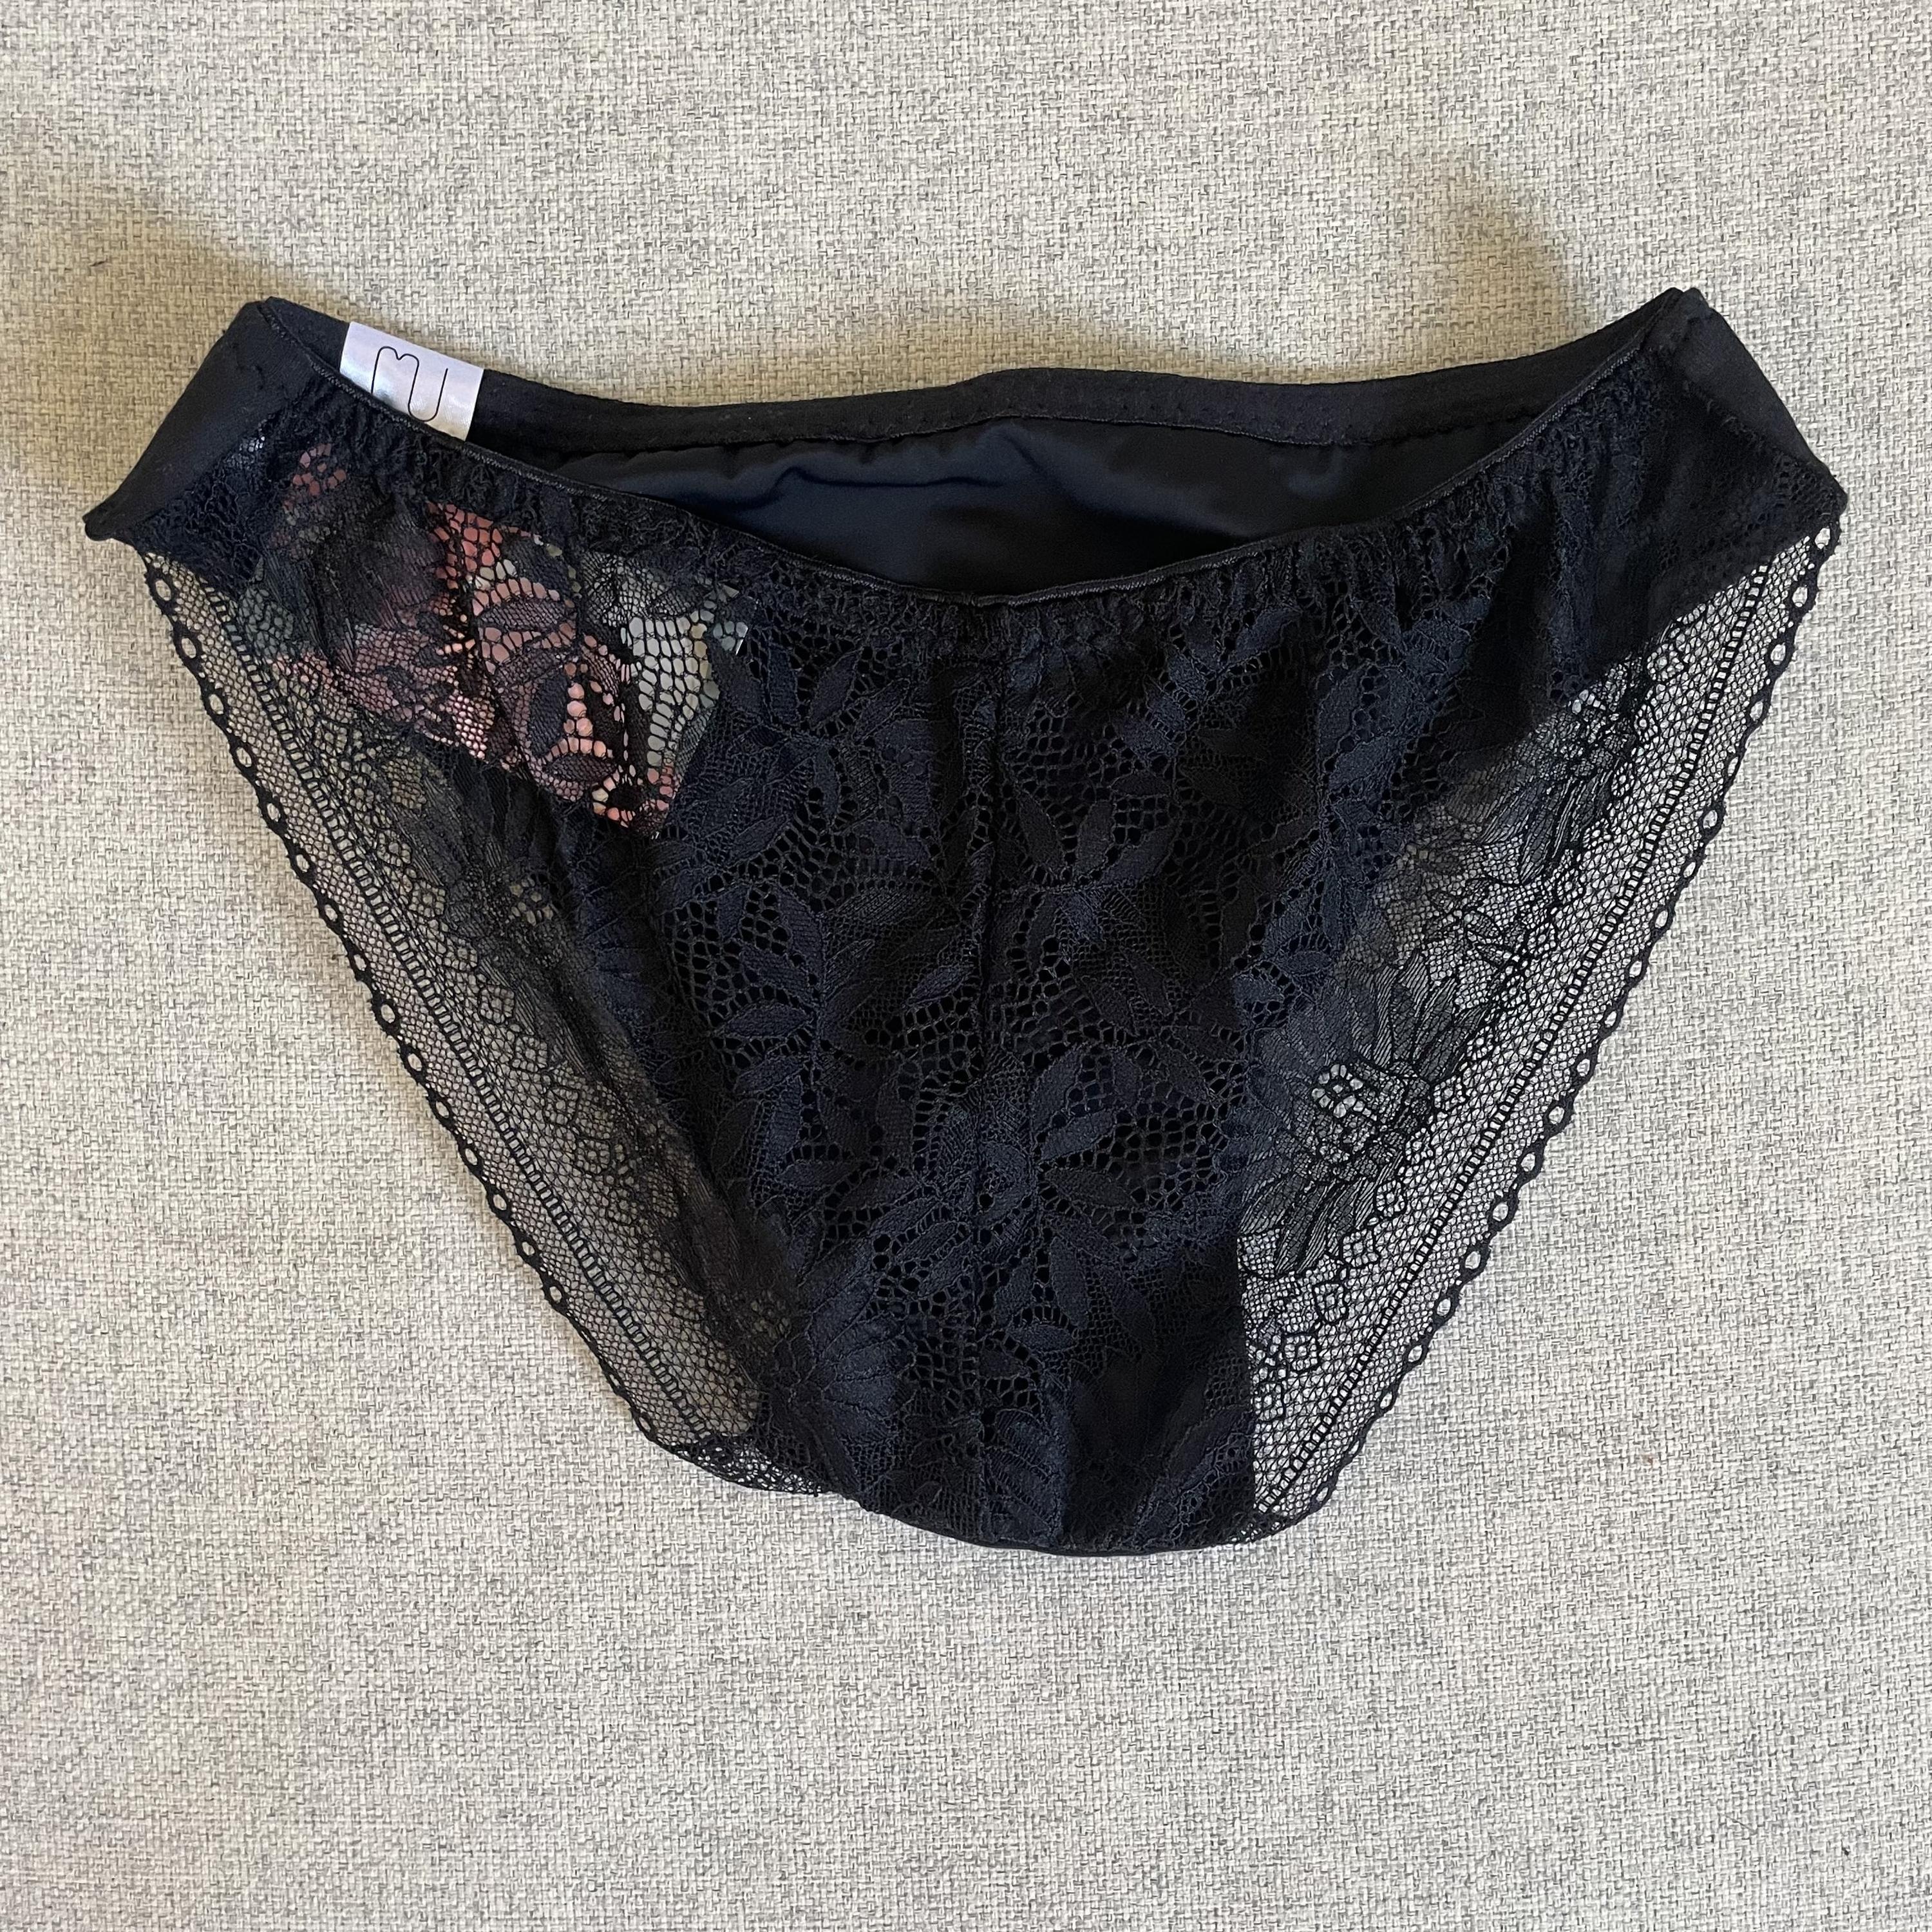 Undrowear Gaff Panties – Other Nature GmbH